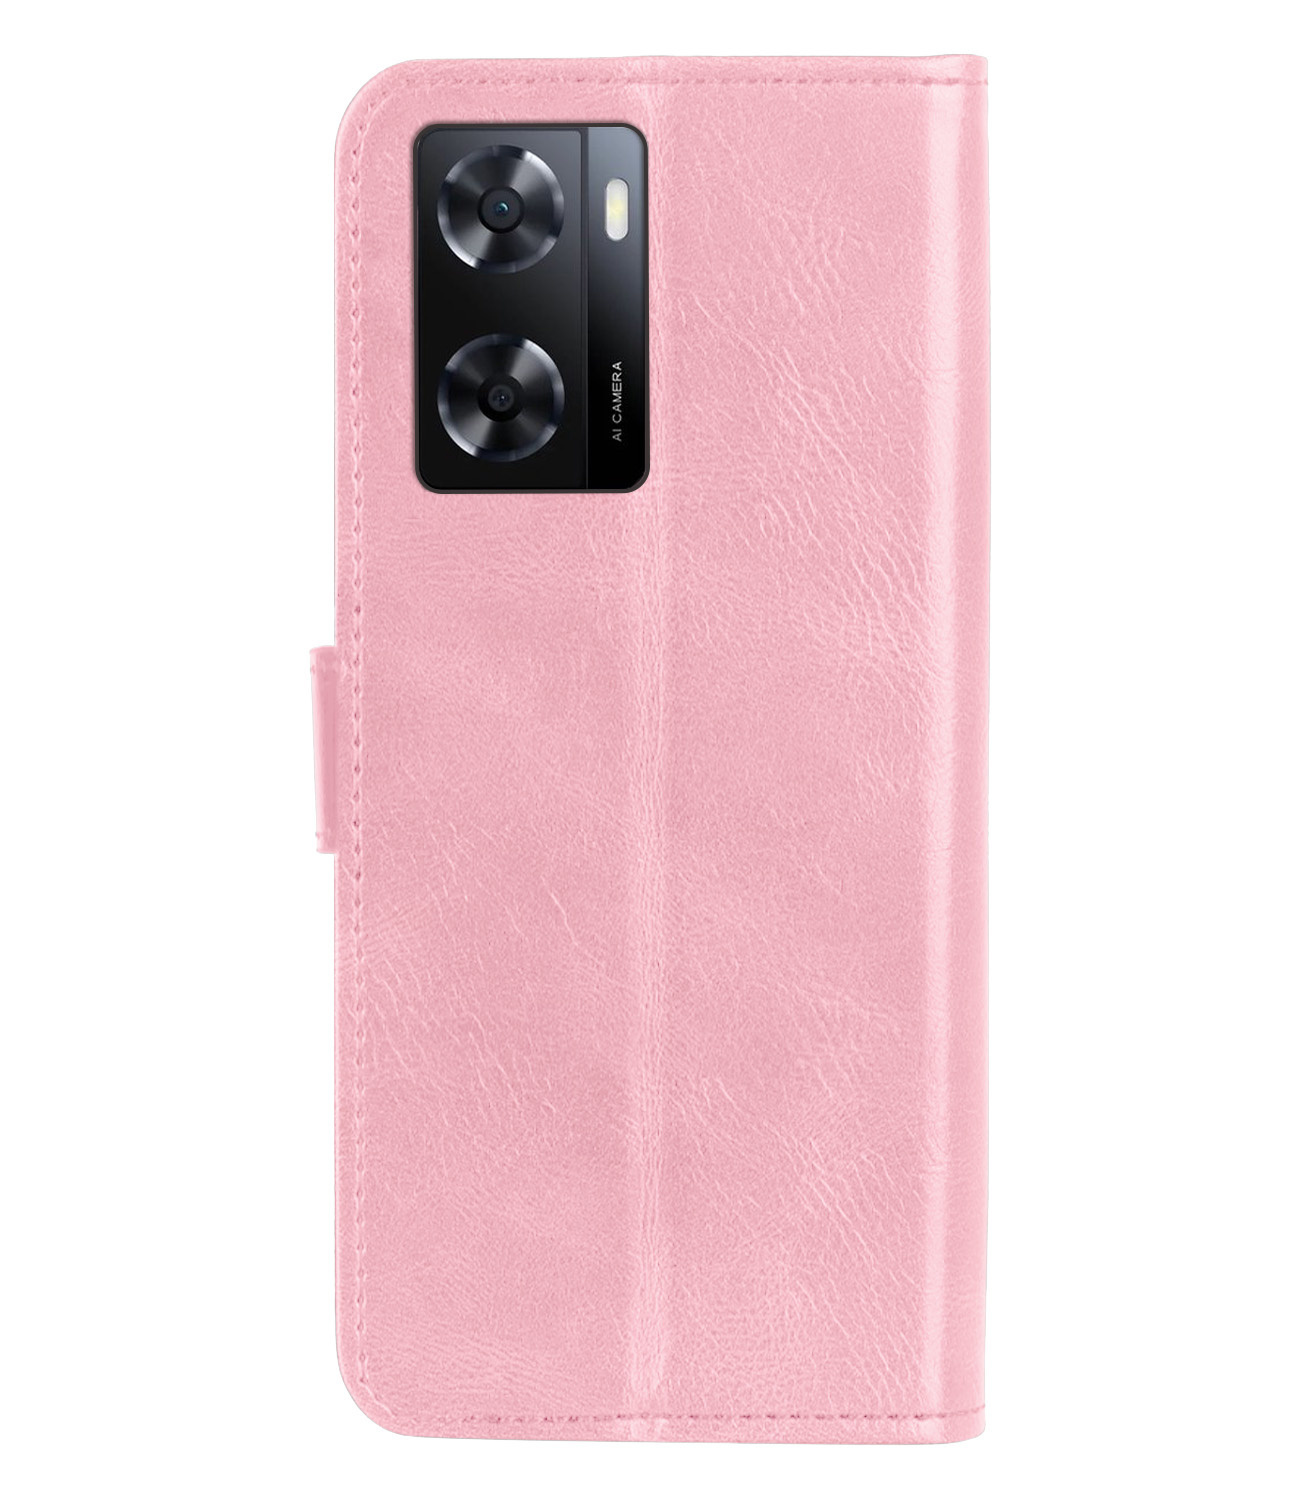 Nomfy OPPO A57s Hoes Bookcase Flipcase Book Cover Met Screenprotector - OPPO A57s Hoesje Book Case - Lichtroze